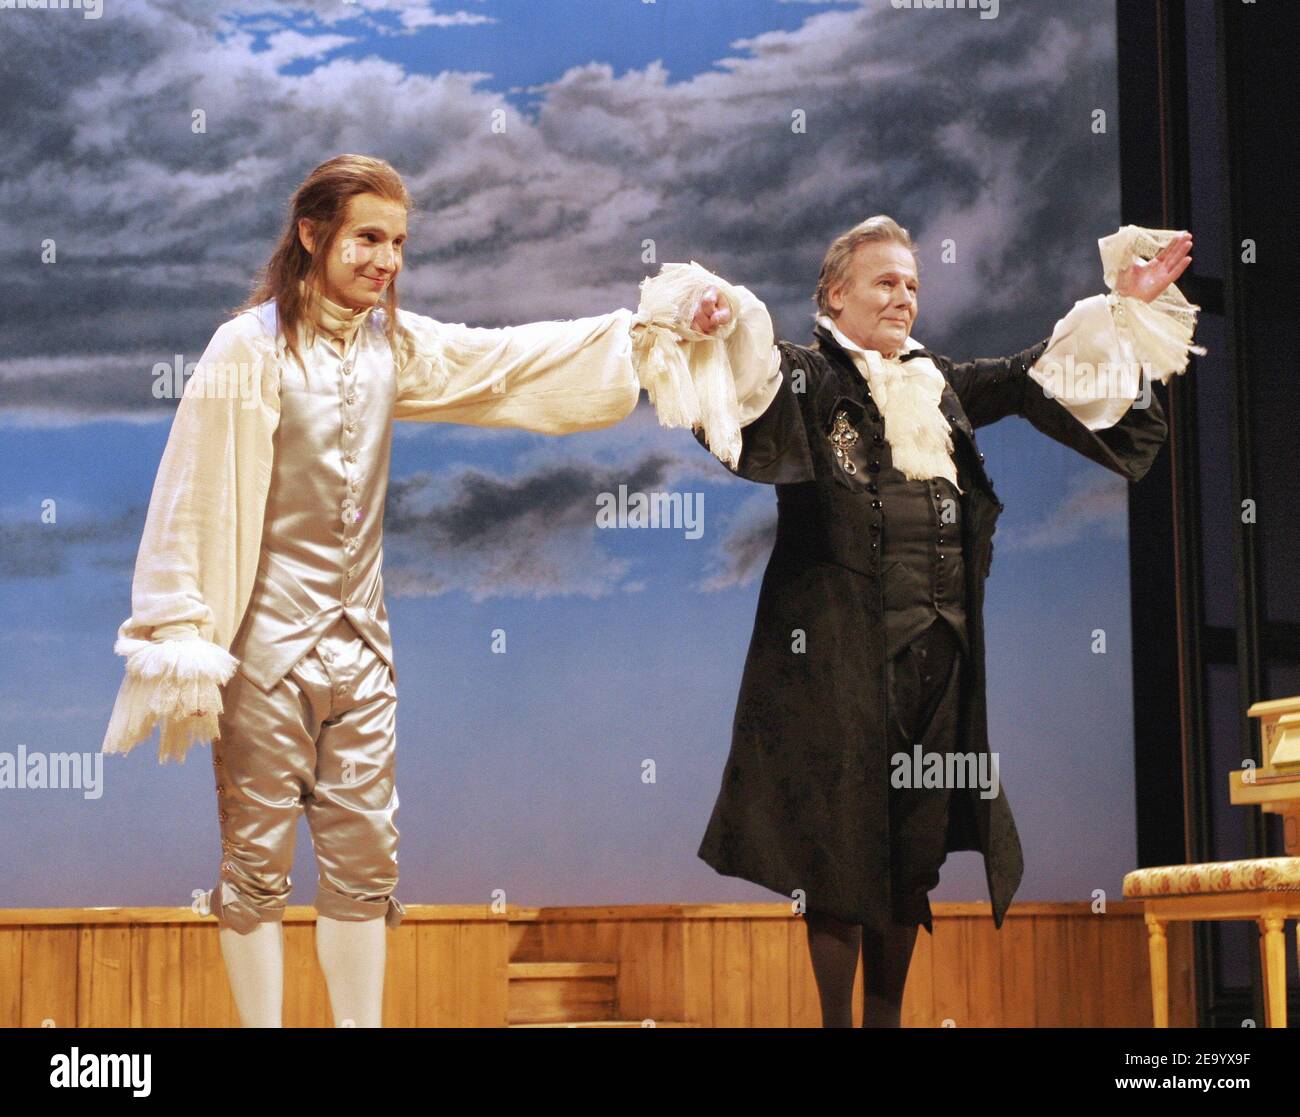 French actors Lorant Deutsch and Jean Piat salute the public after the premiere of Amadeus at the Theatre de Paris in Paris, France on January 26, 2005. Photo by Guillaume Baptiste/ABACA. Stock Photo